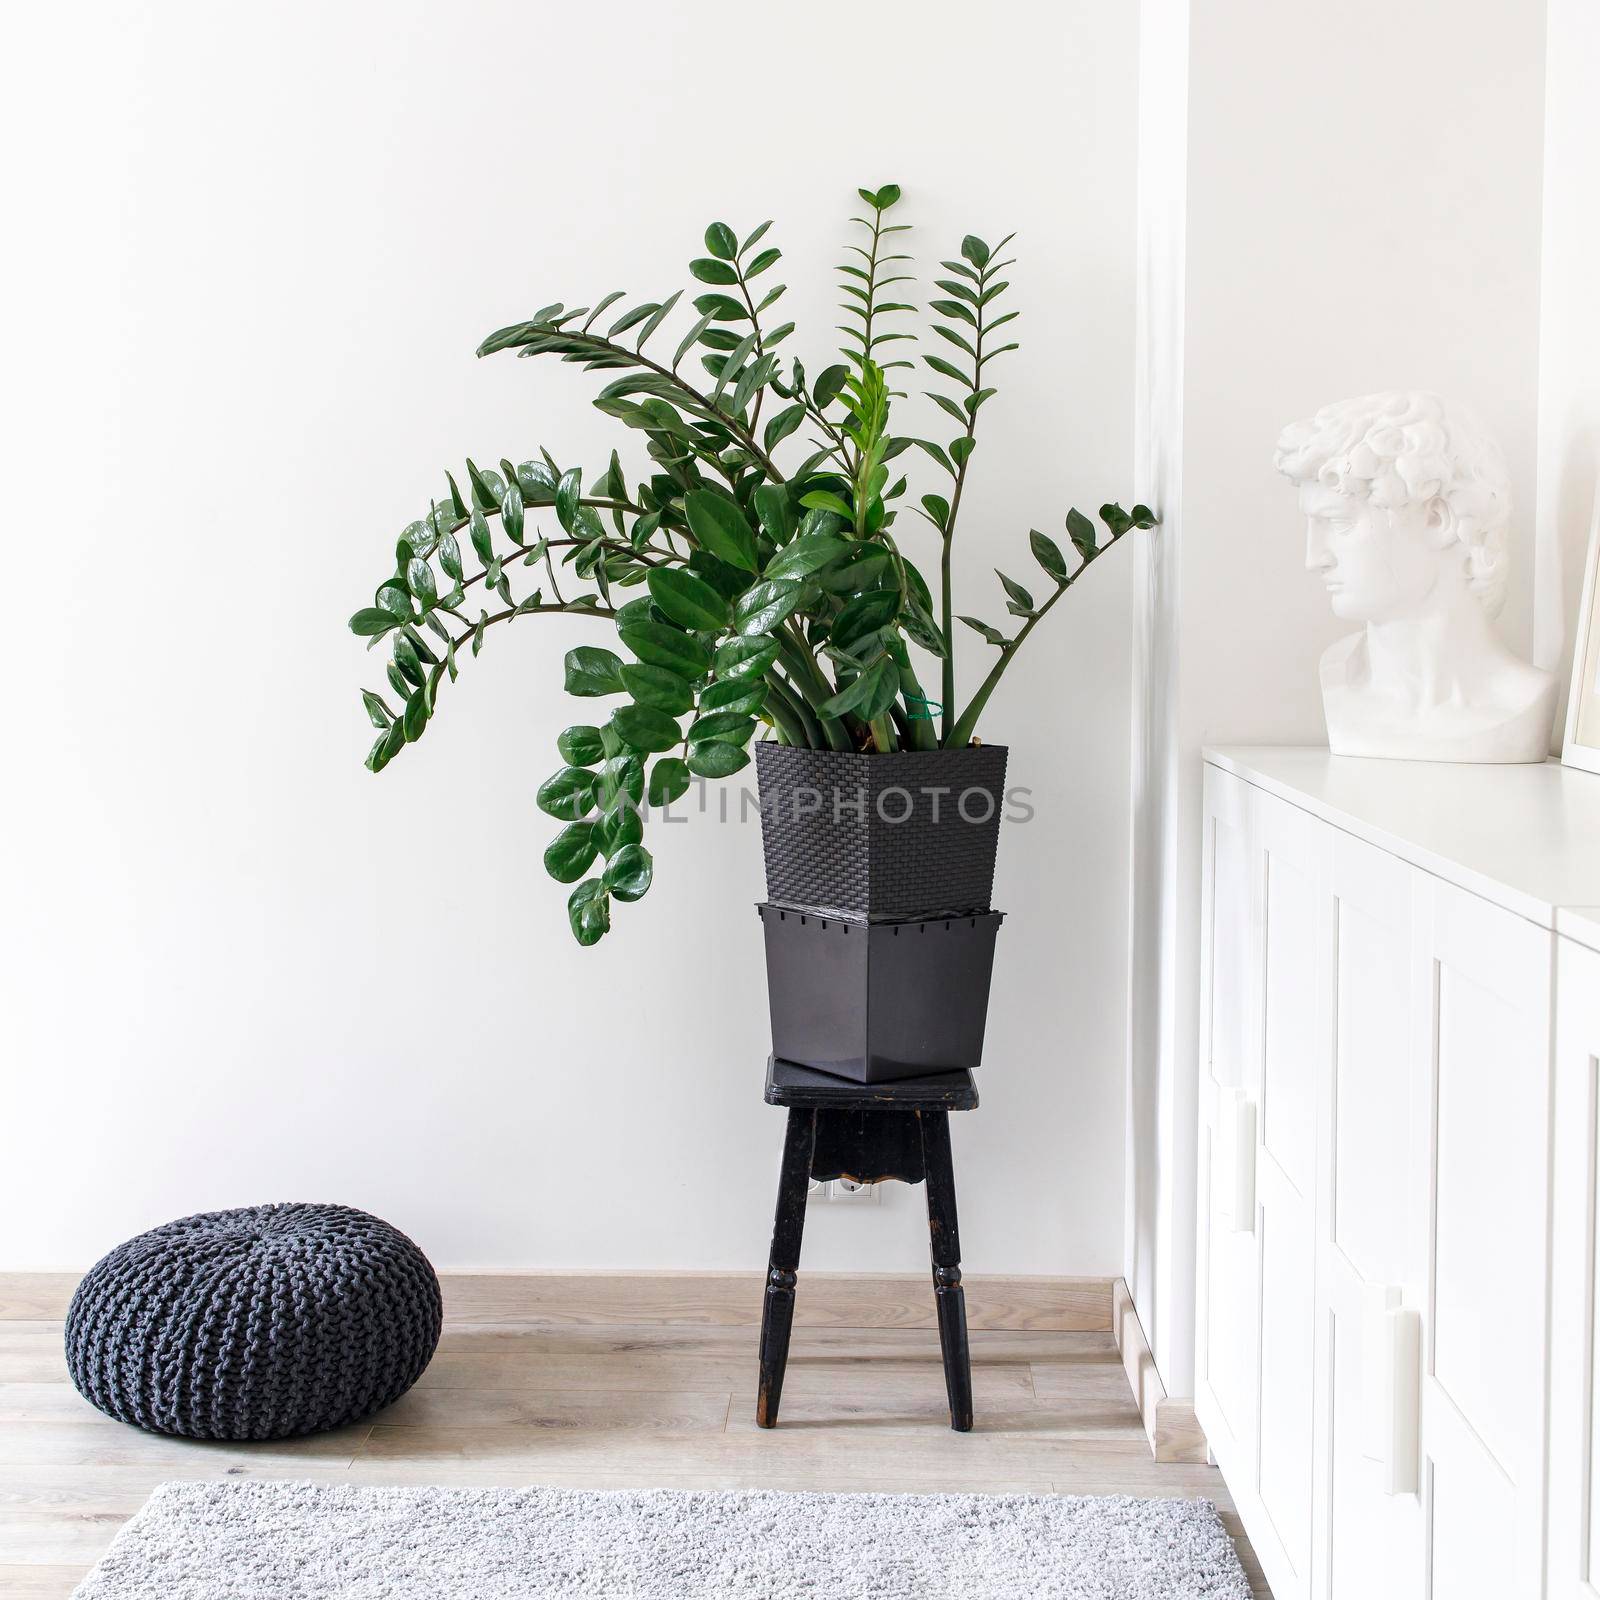 Scandinavian style room interior in white tones. A chest of drawers with a photo frame, a large indoor Zamioculcas flower on a stool in the corner, a gray curpet and a black knitted pouffe.